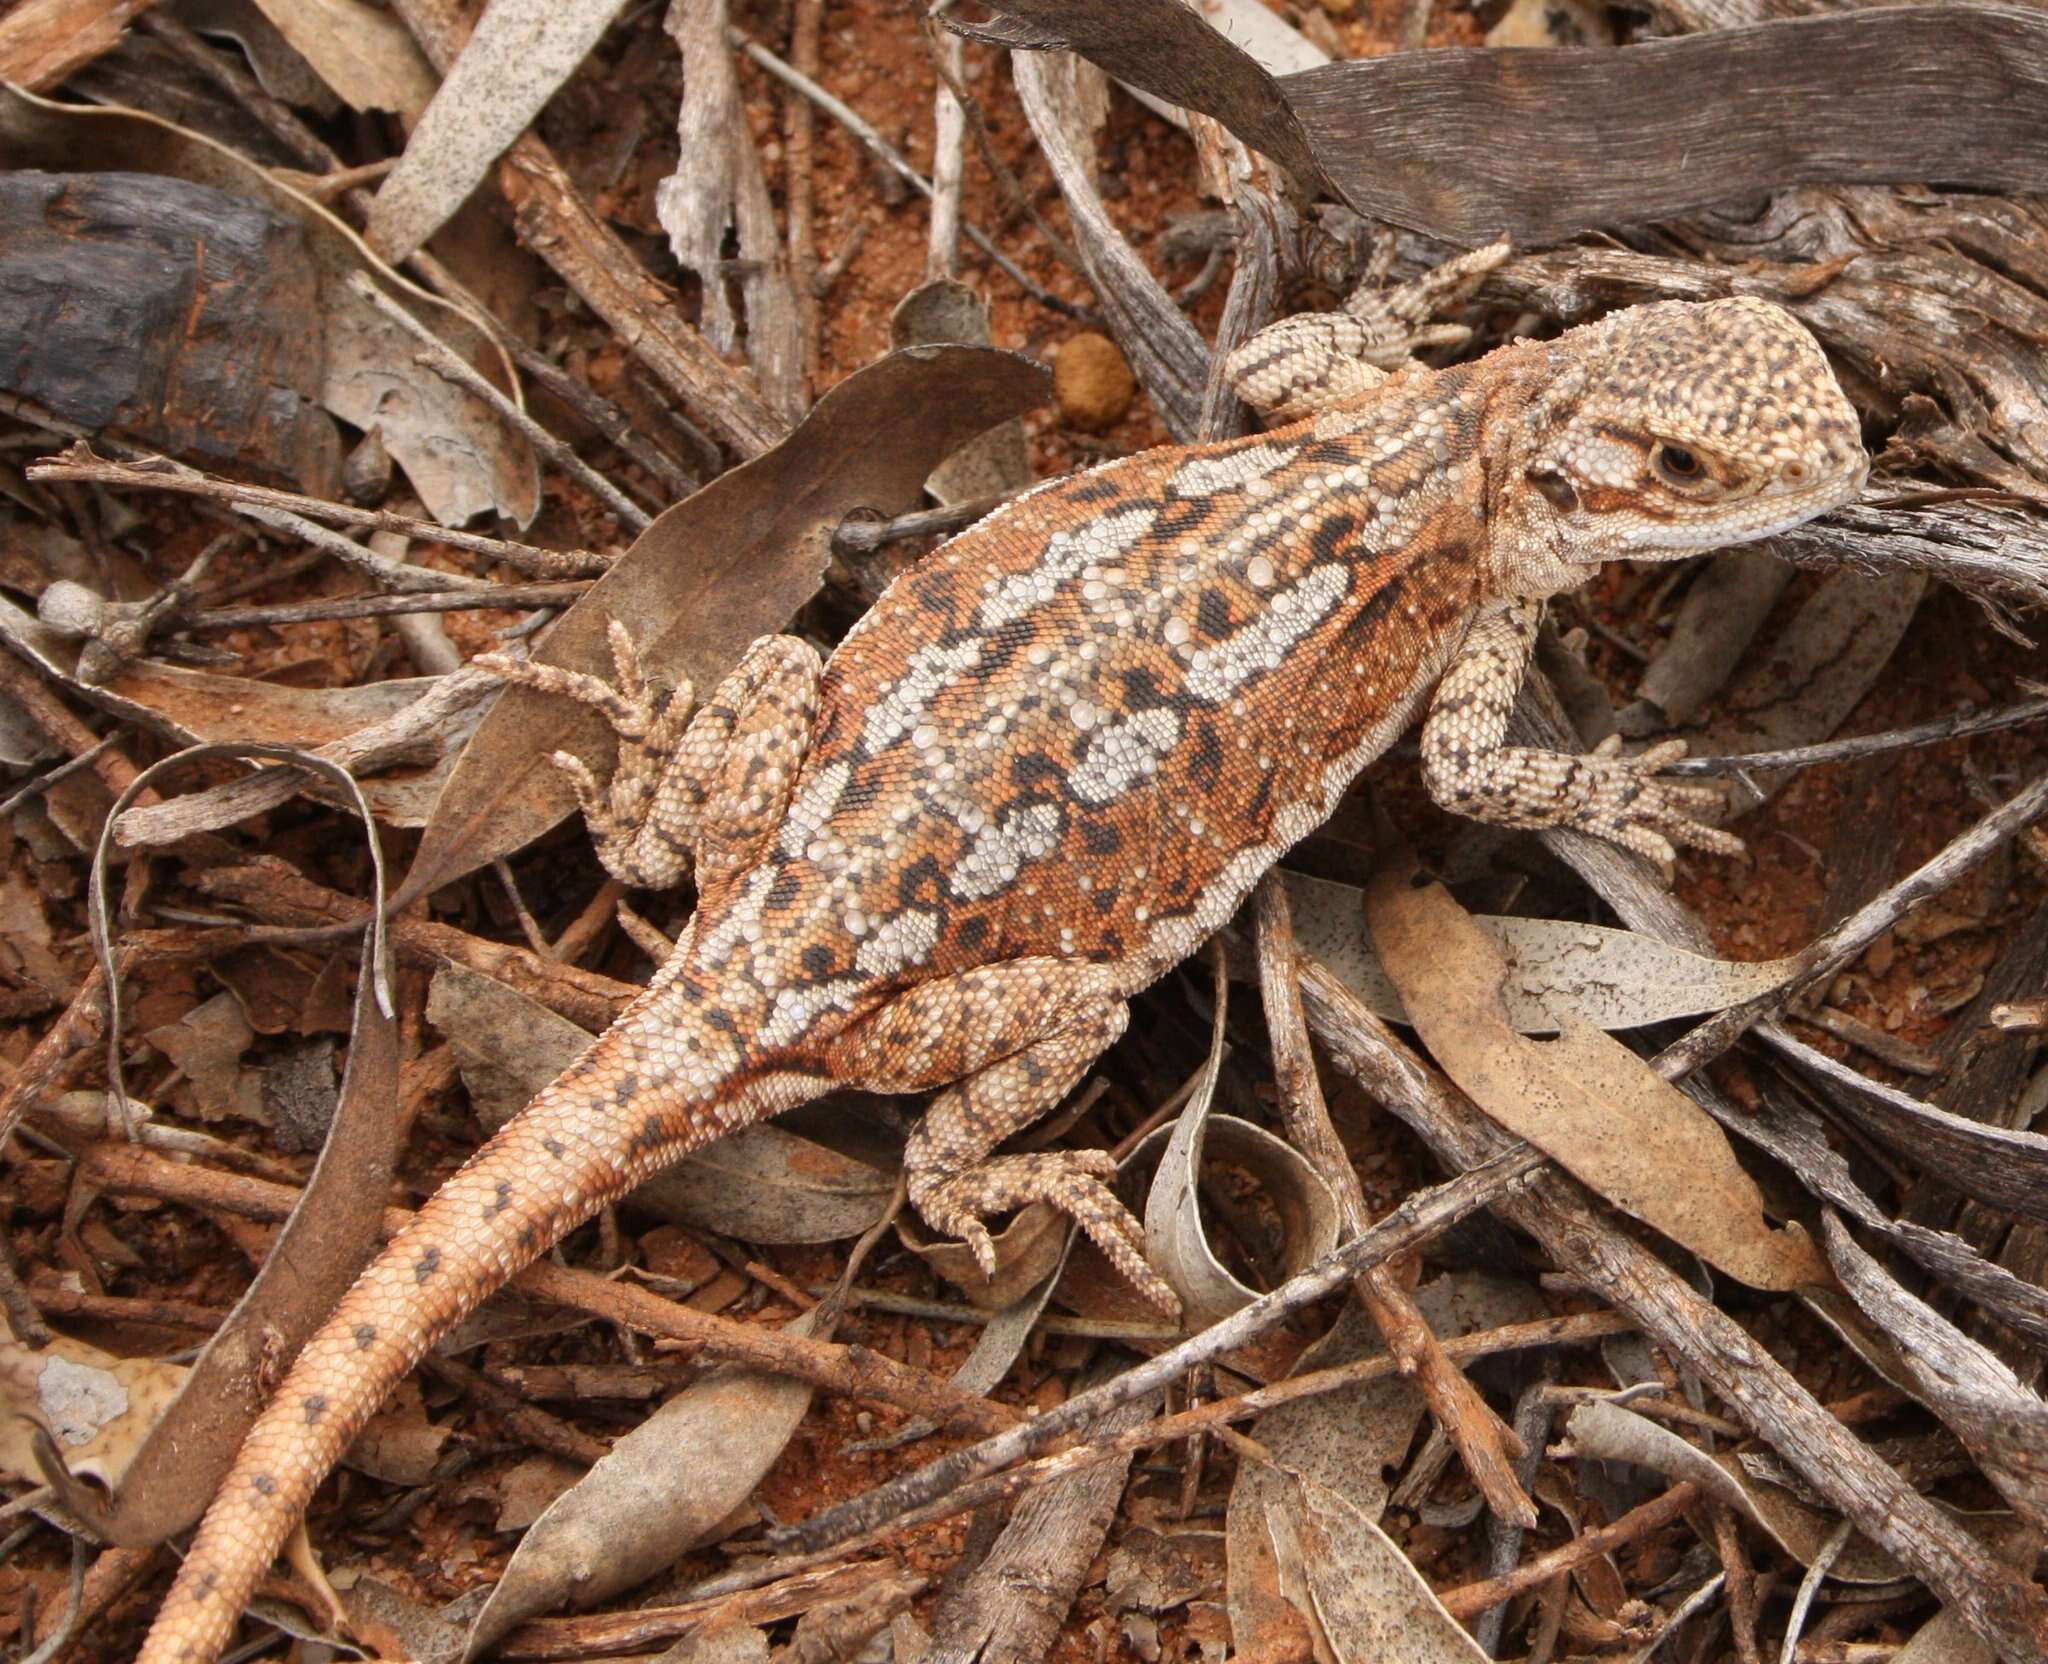 Image of Western netted dragon